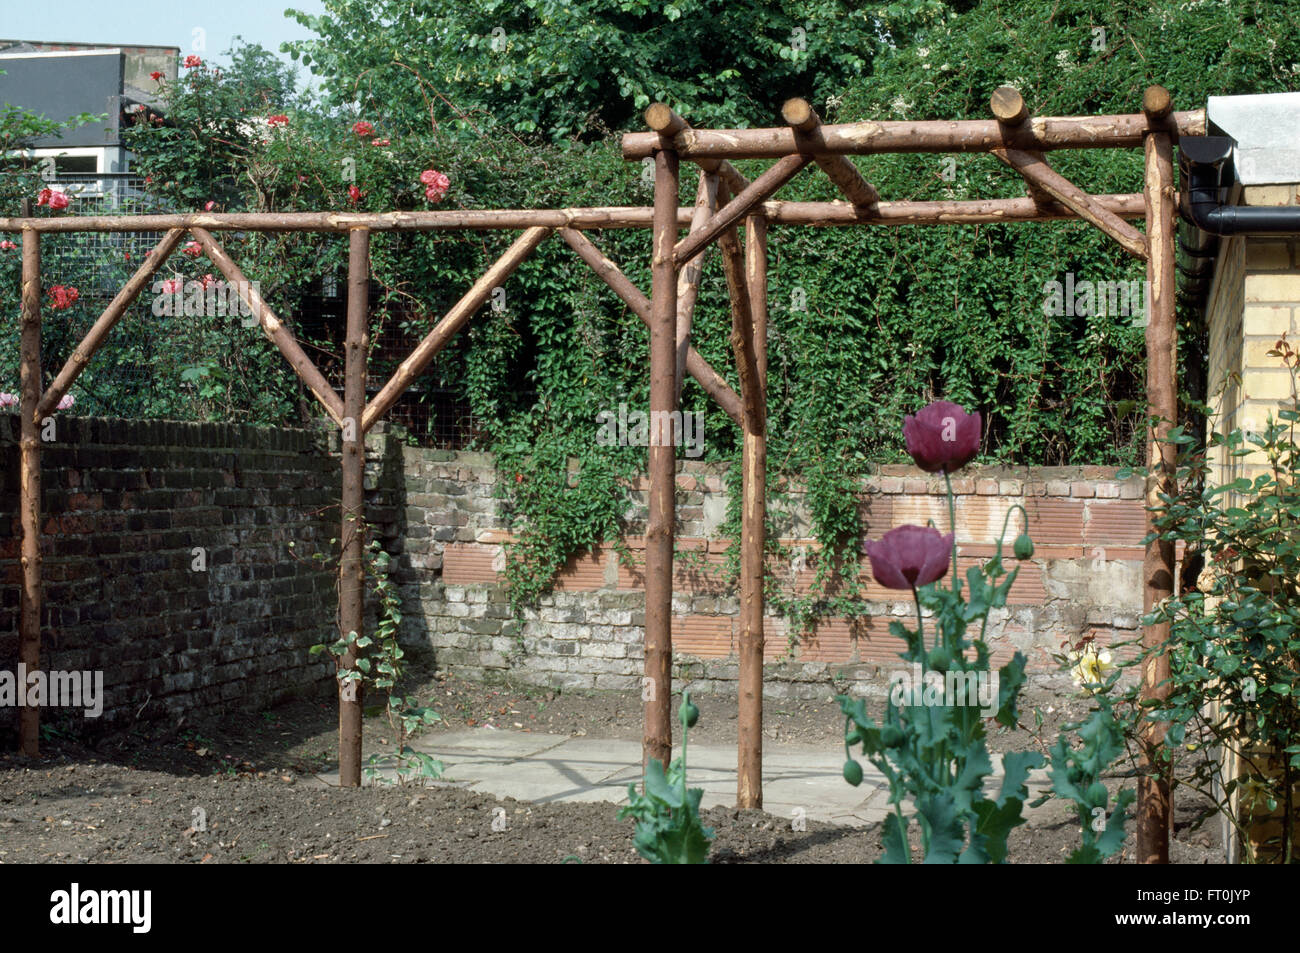 A newly made rustic wooden pergola in a garden undergoing renovation Stock Photo